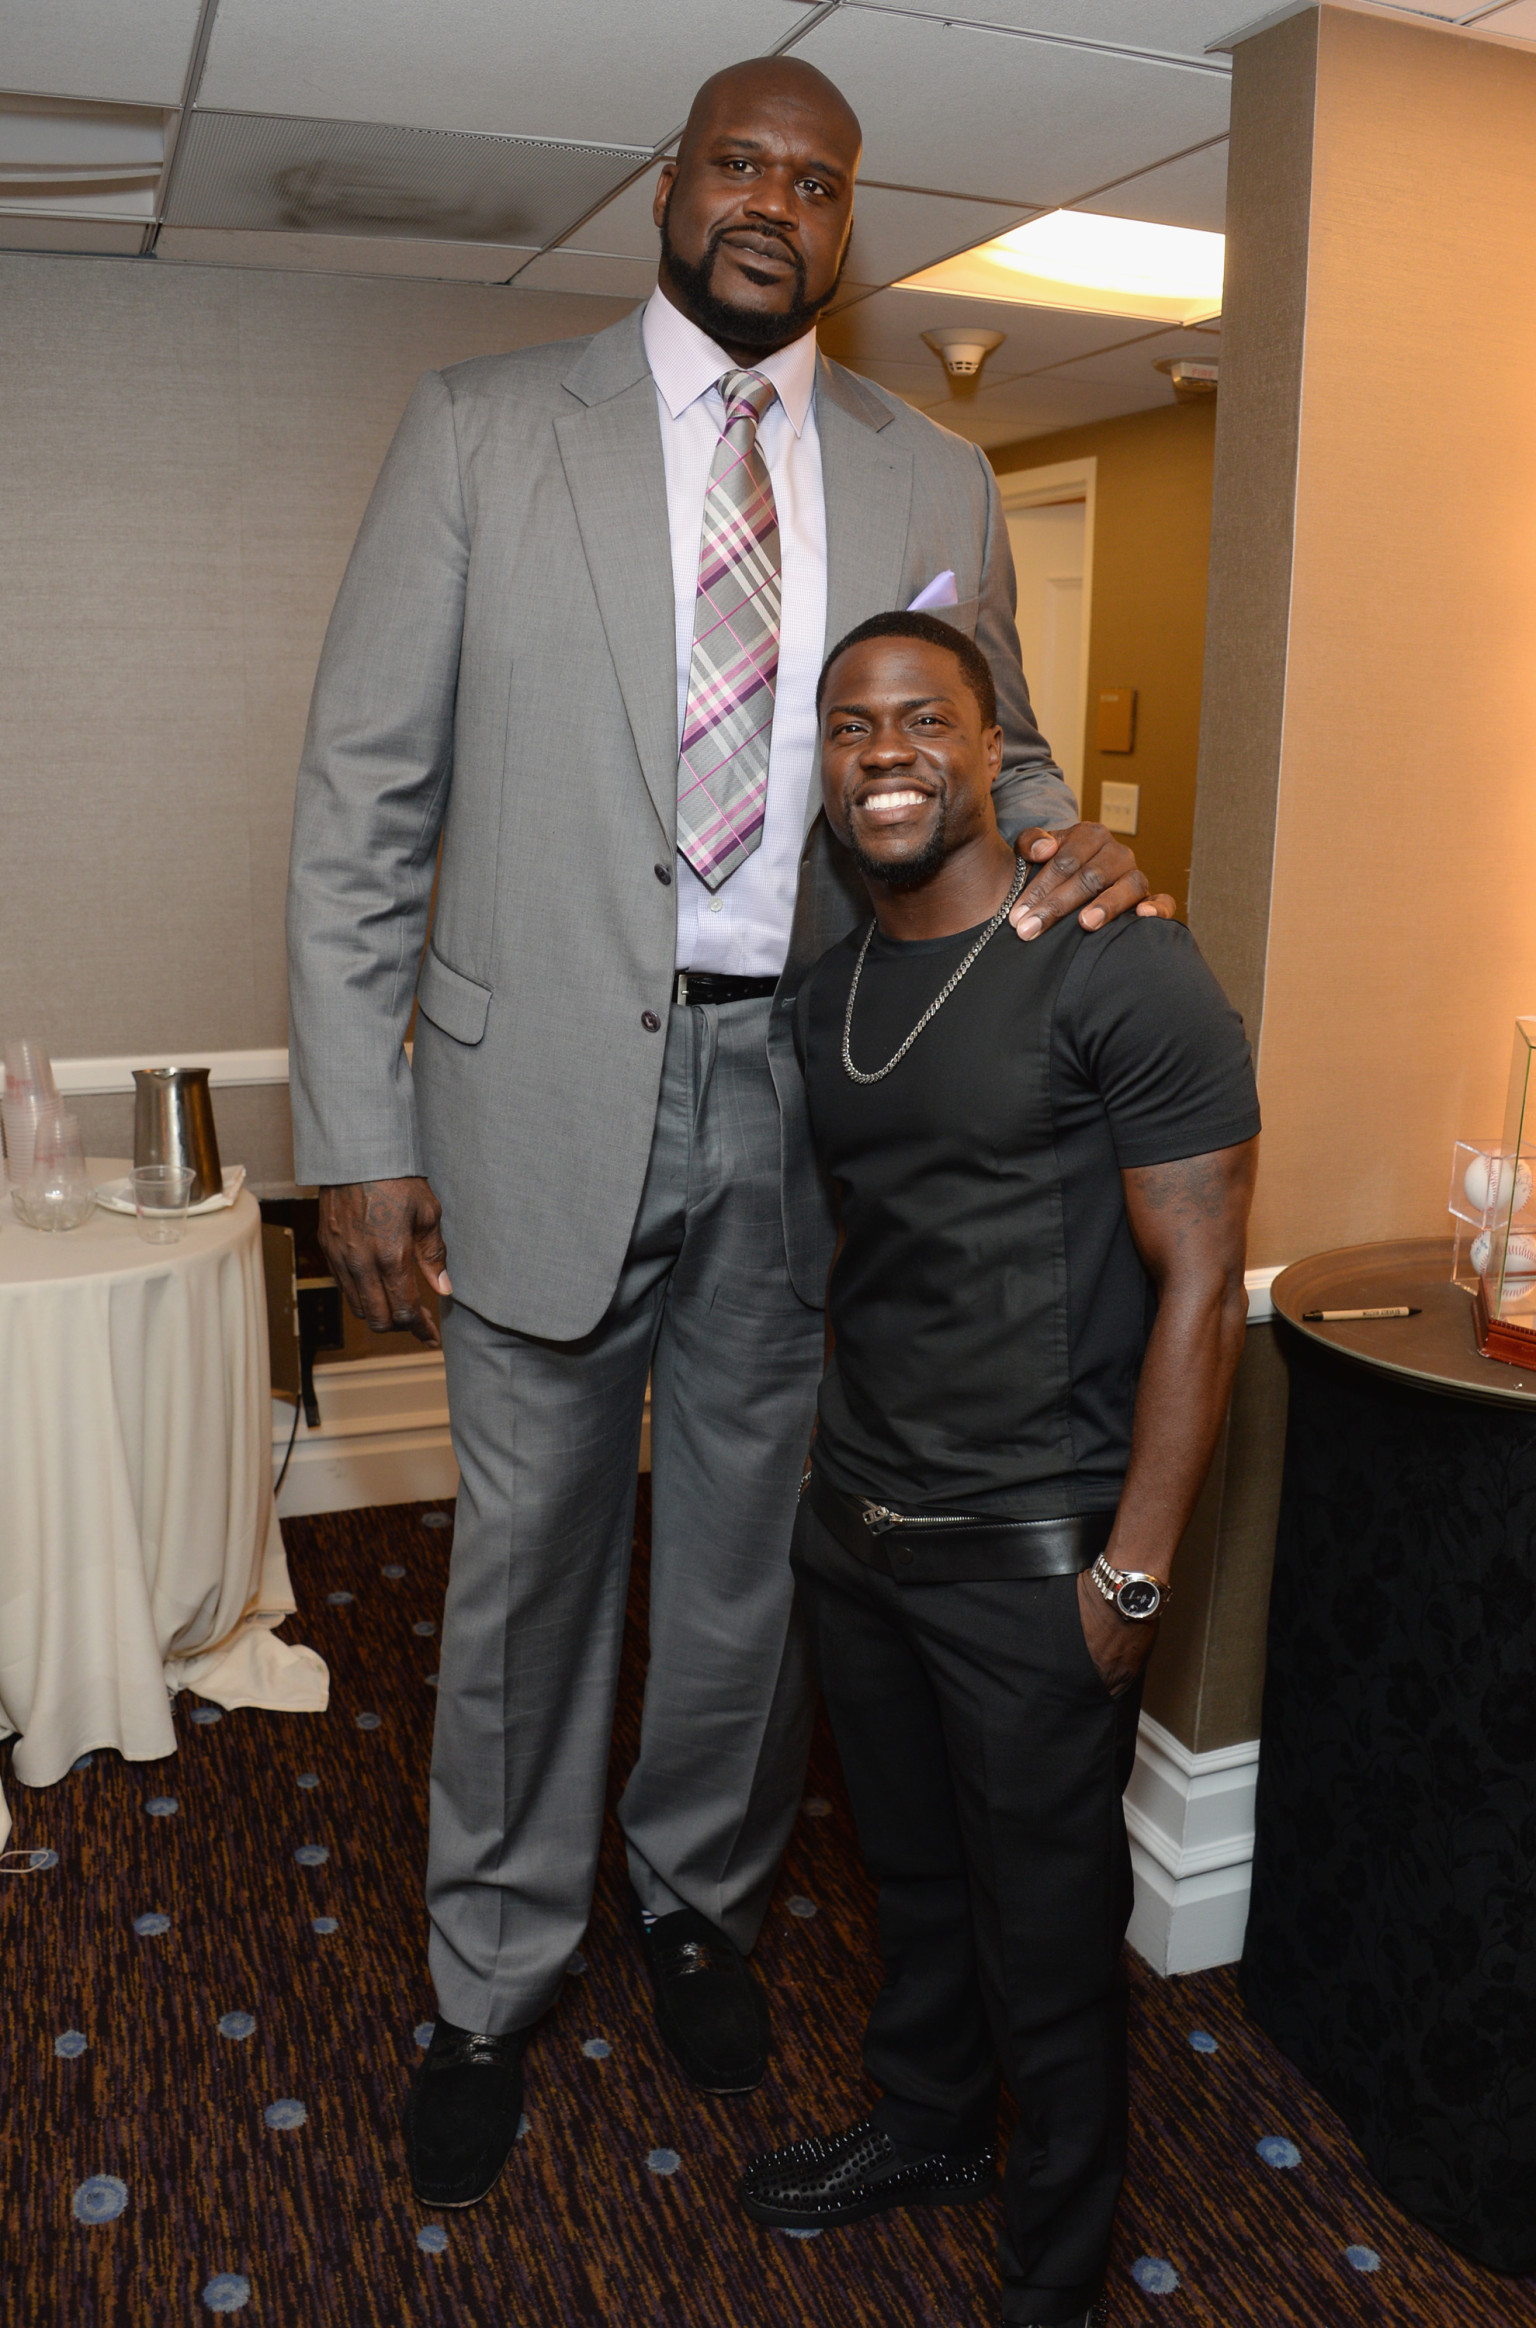 Shaquille O'Neal And Kevin Hart Pose For The Best Photo The Internet Has Ever Seen ...1536 x 2328